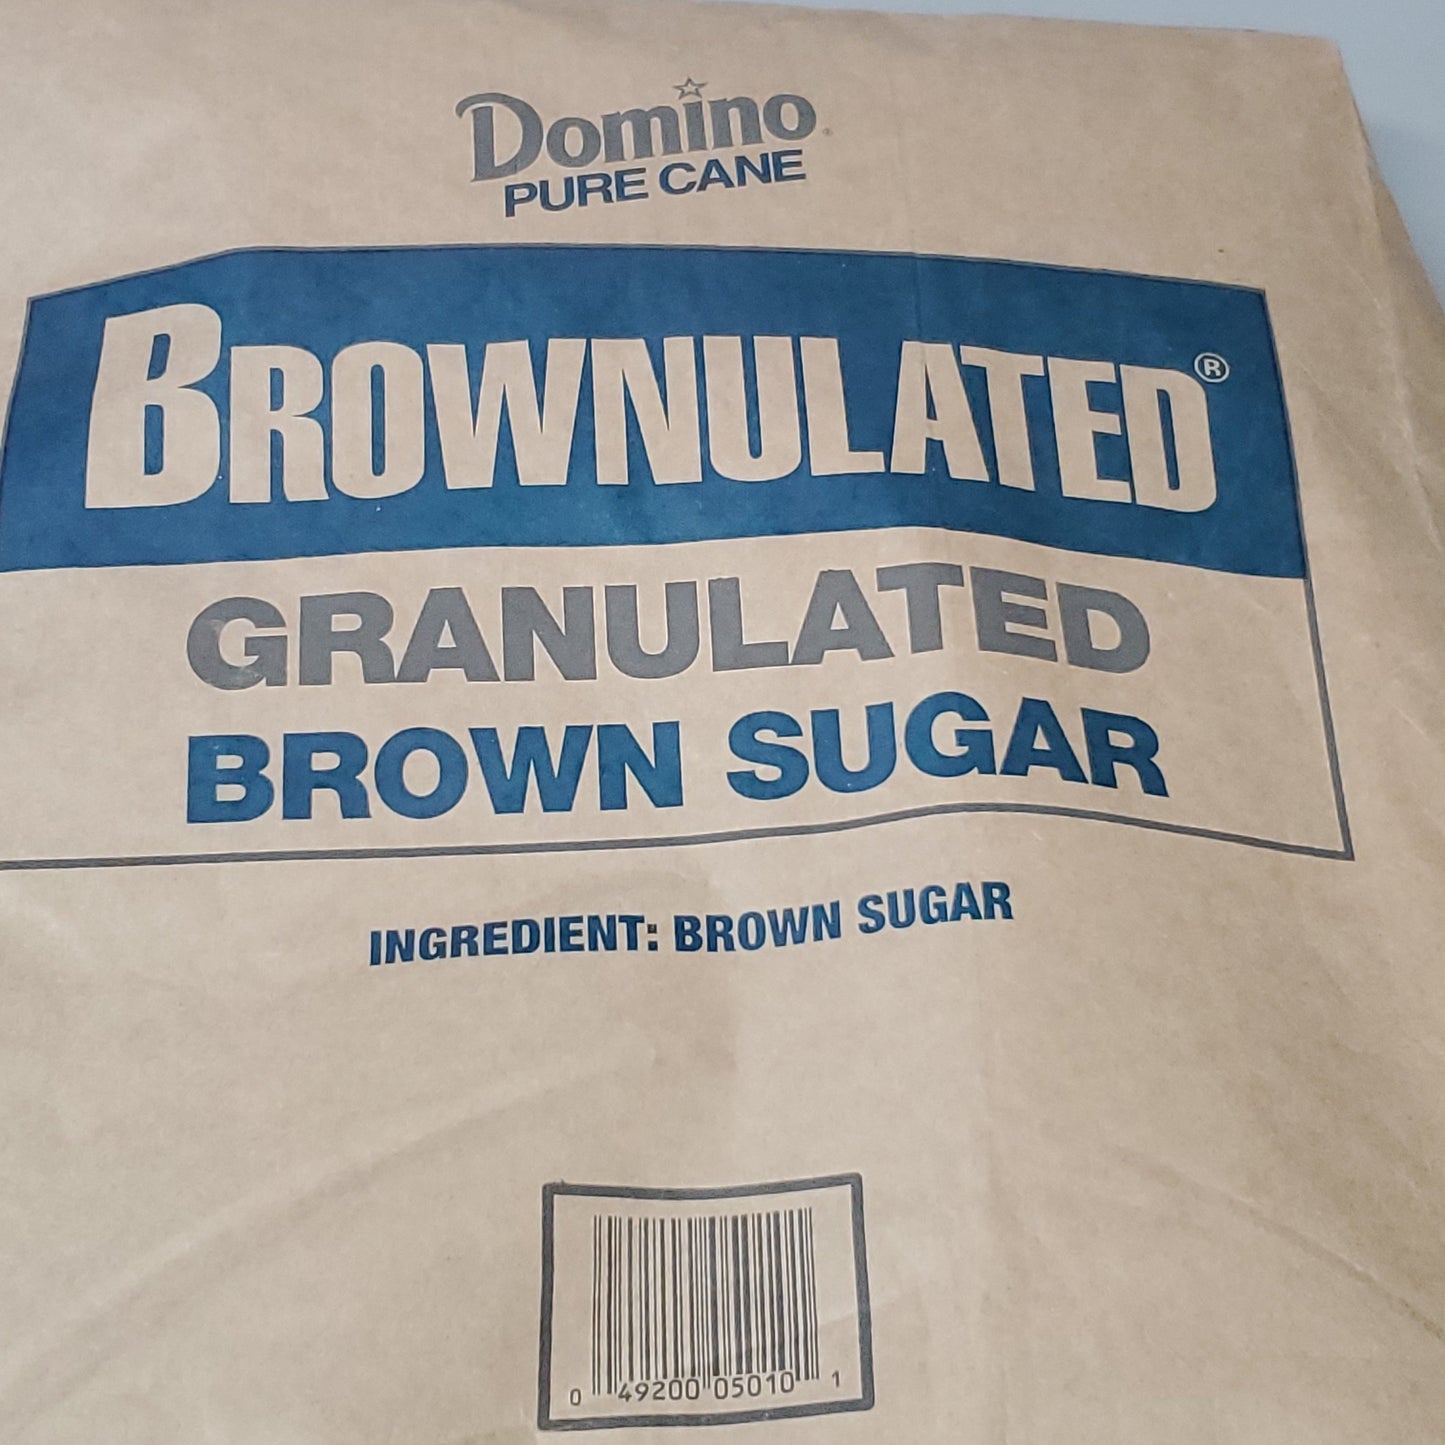 Z@ DOMINO FOODS Lot of 10 Bags! Pure Cane Brownulated Granulated Brown Sugar 50 LBS (New)